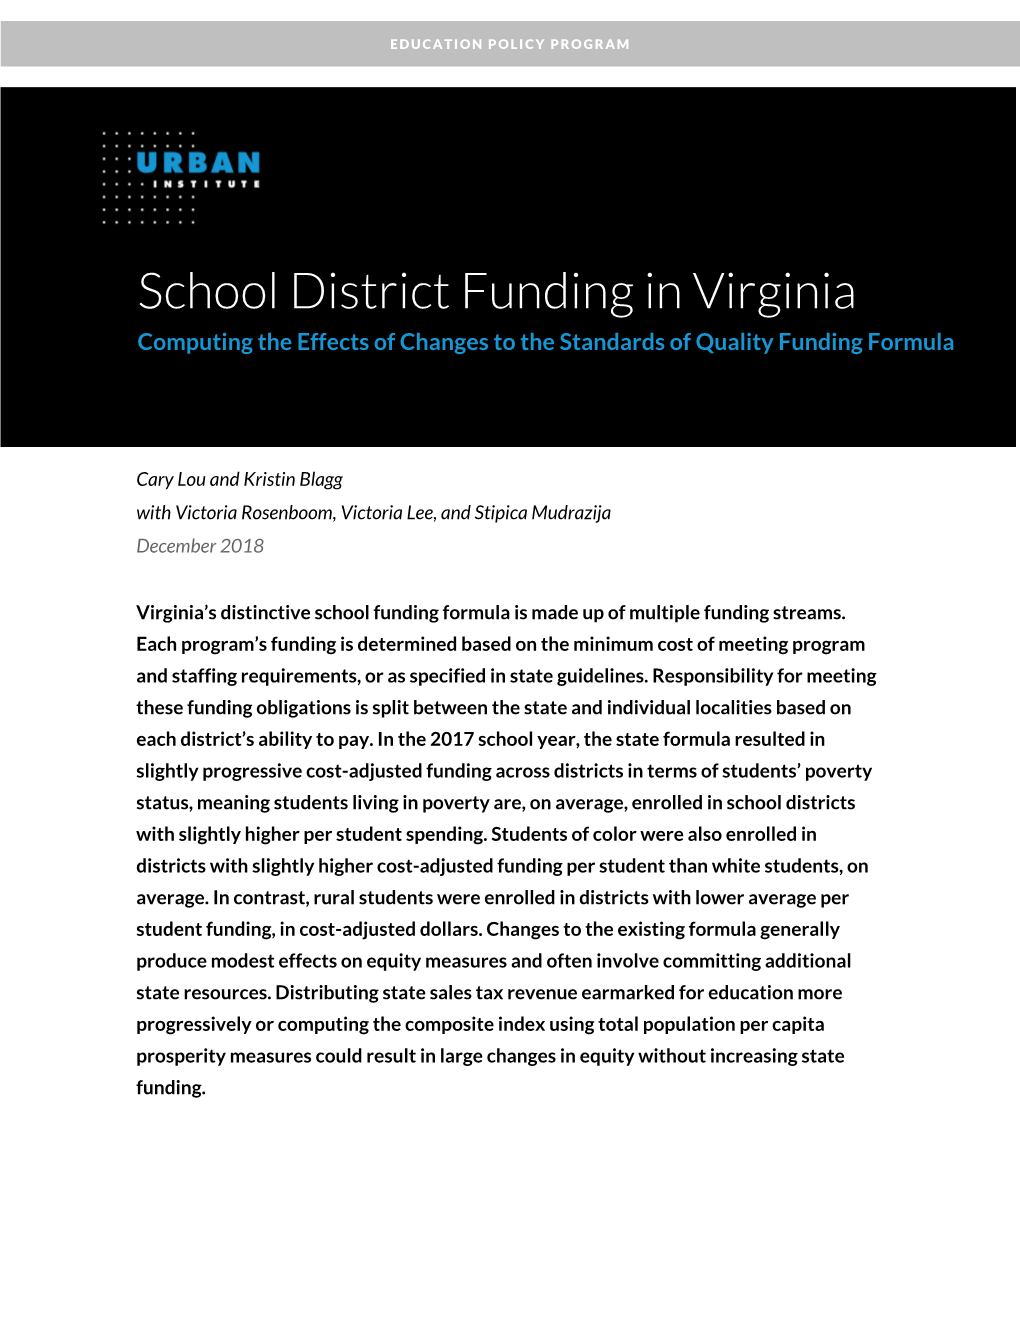 School District Funding in Virginia Computing the Effects of Changes to the Standards of Quality Funding Formula